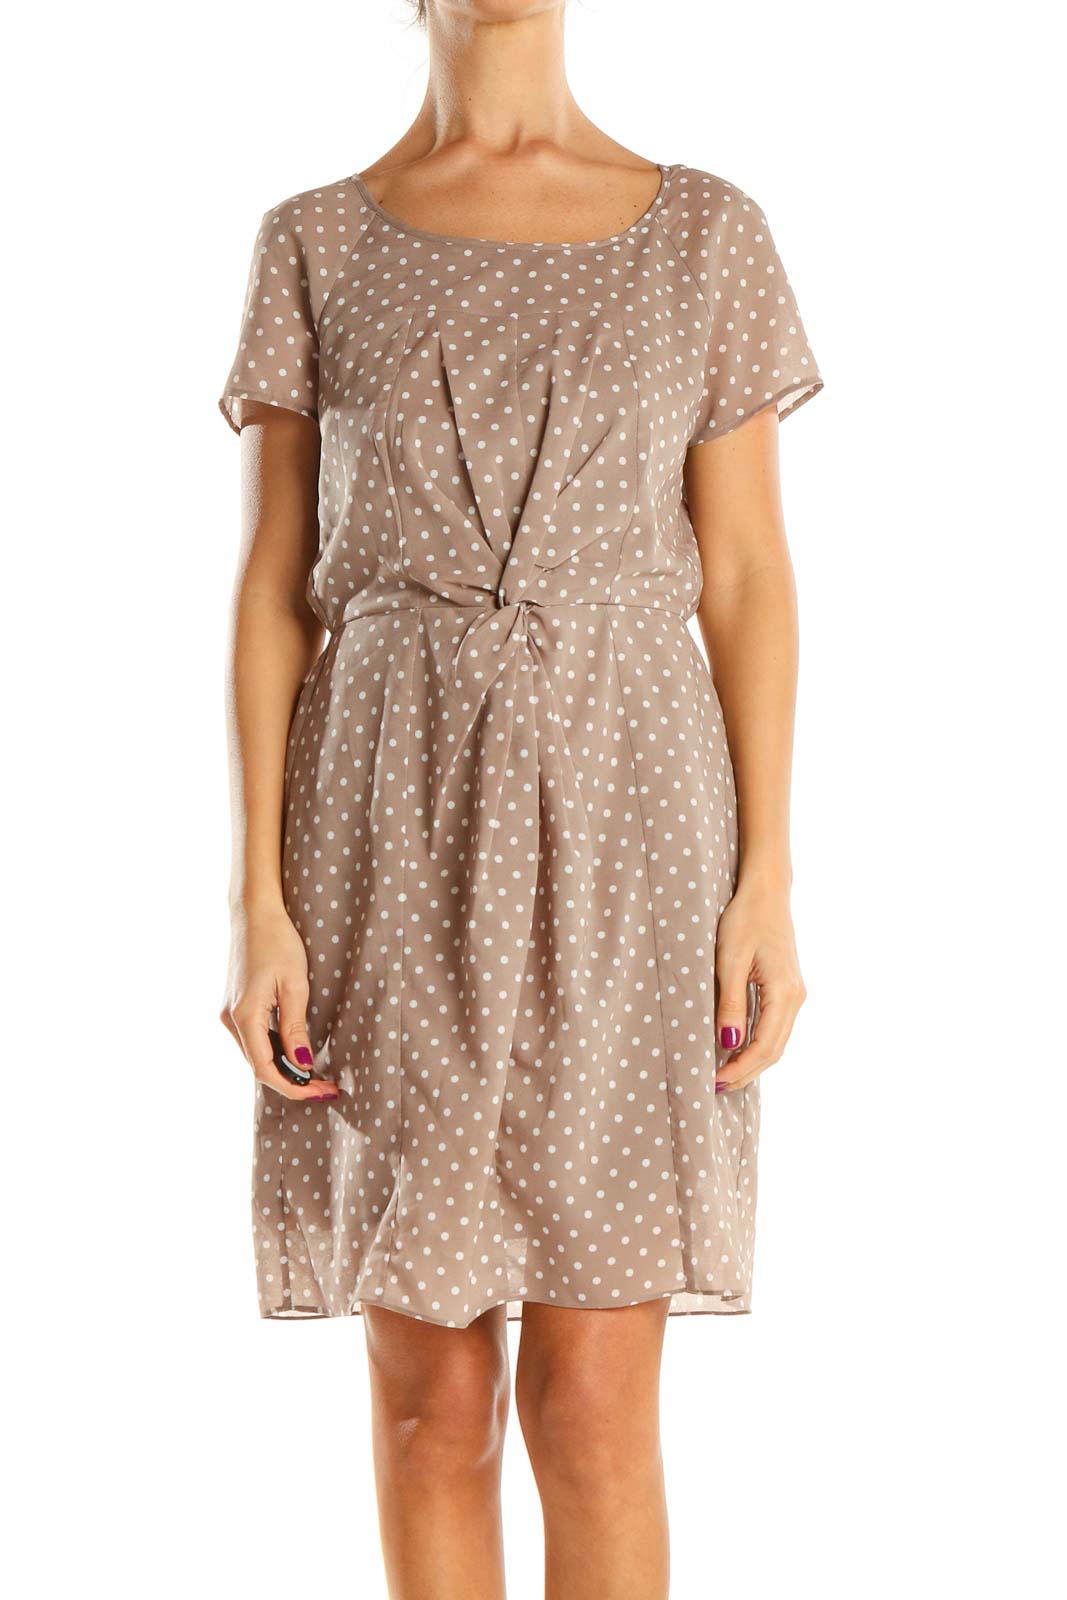 J.Crew - Brown Polka Dot Day Fit & Flare Dress Polyester Acetate